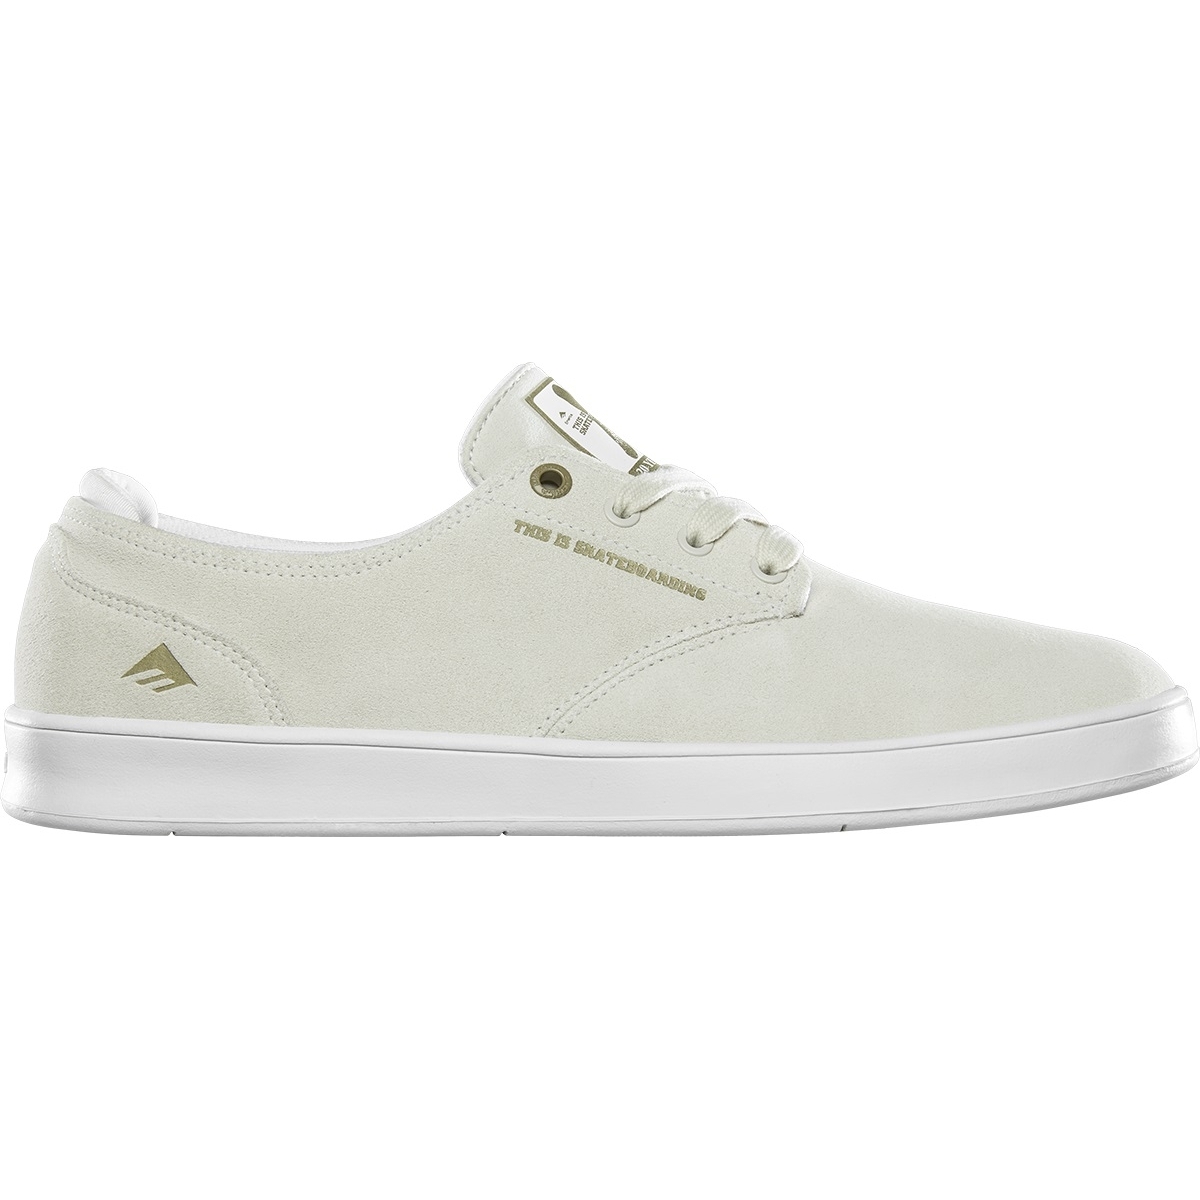 Romero Laced x This Is Skateboarding (White)